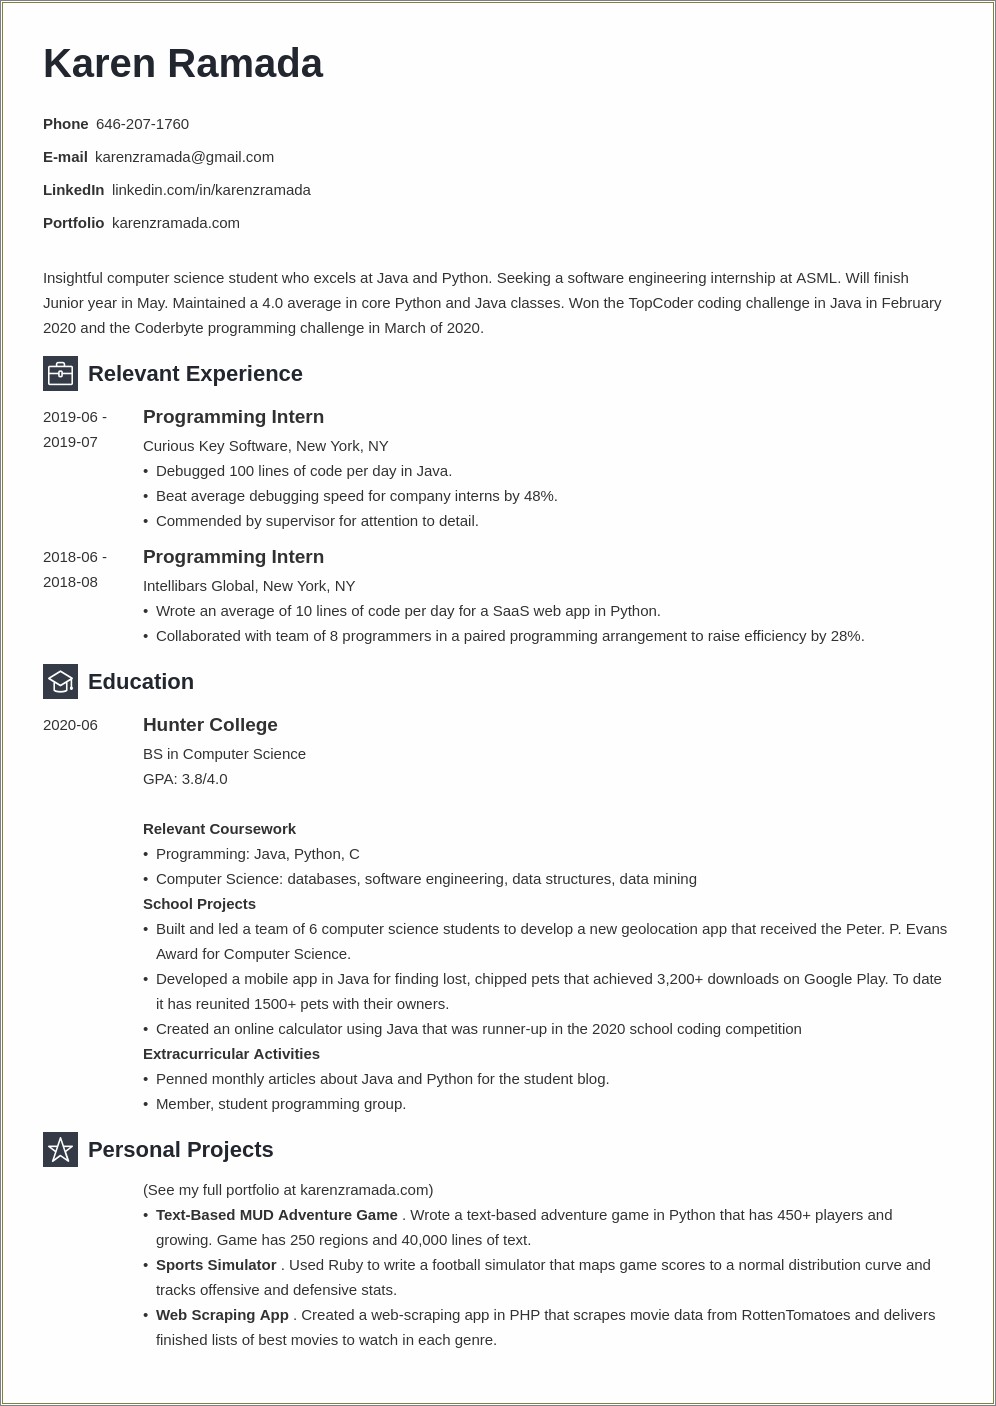 Sample Resume For Experienced Engineer In Mainframe